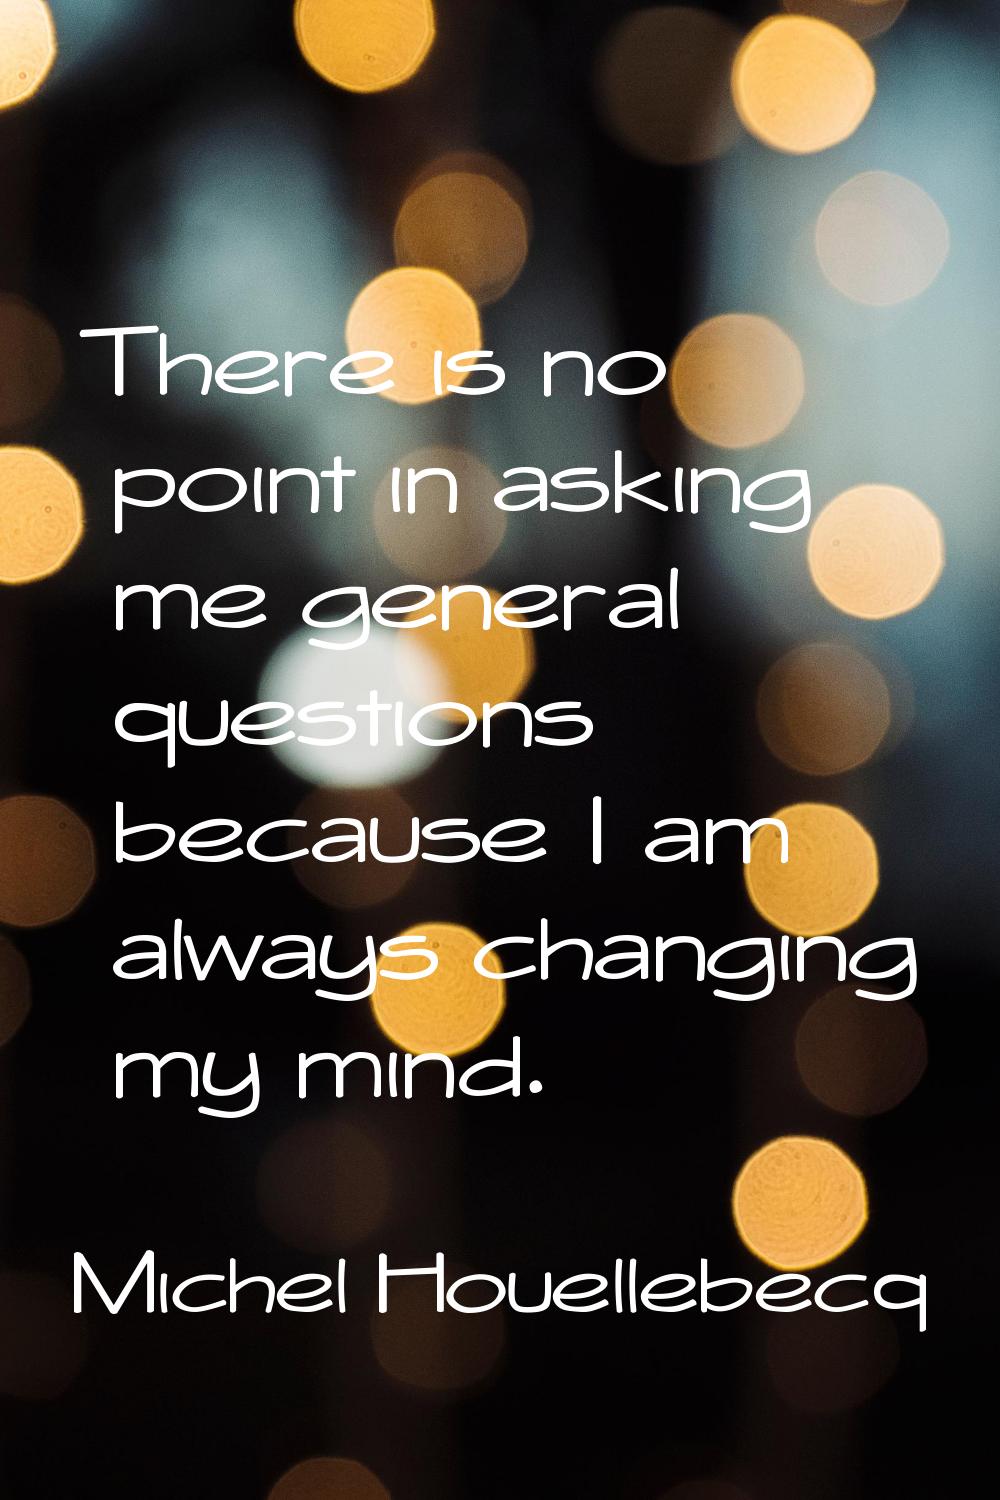 There is no point in asking me general questions because I am always changing my mind.